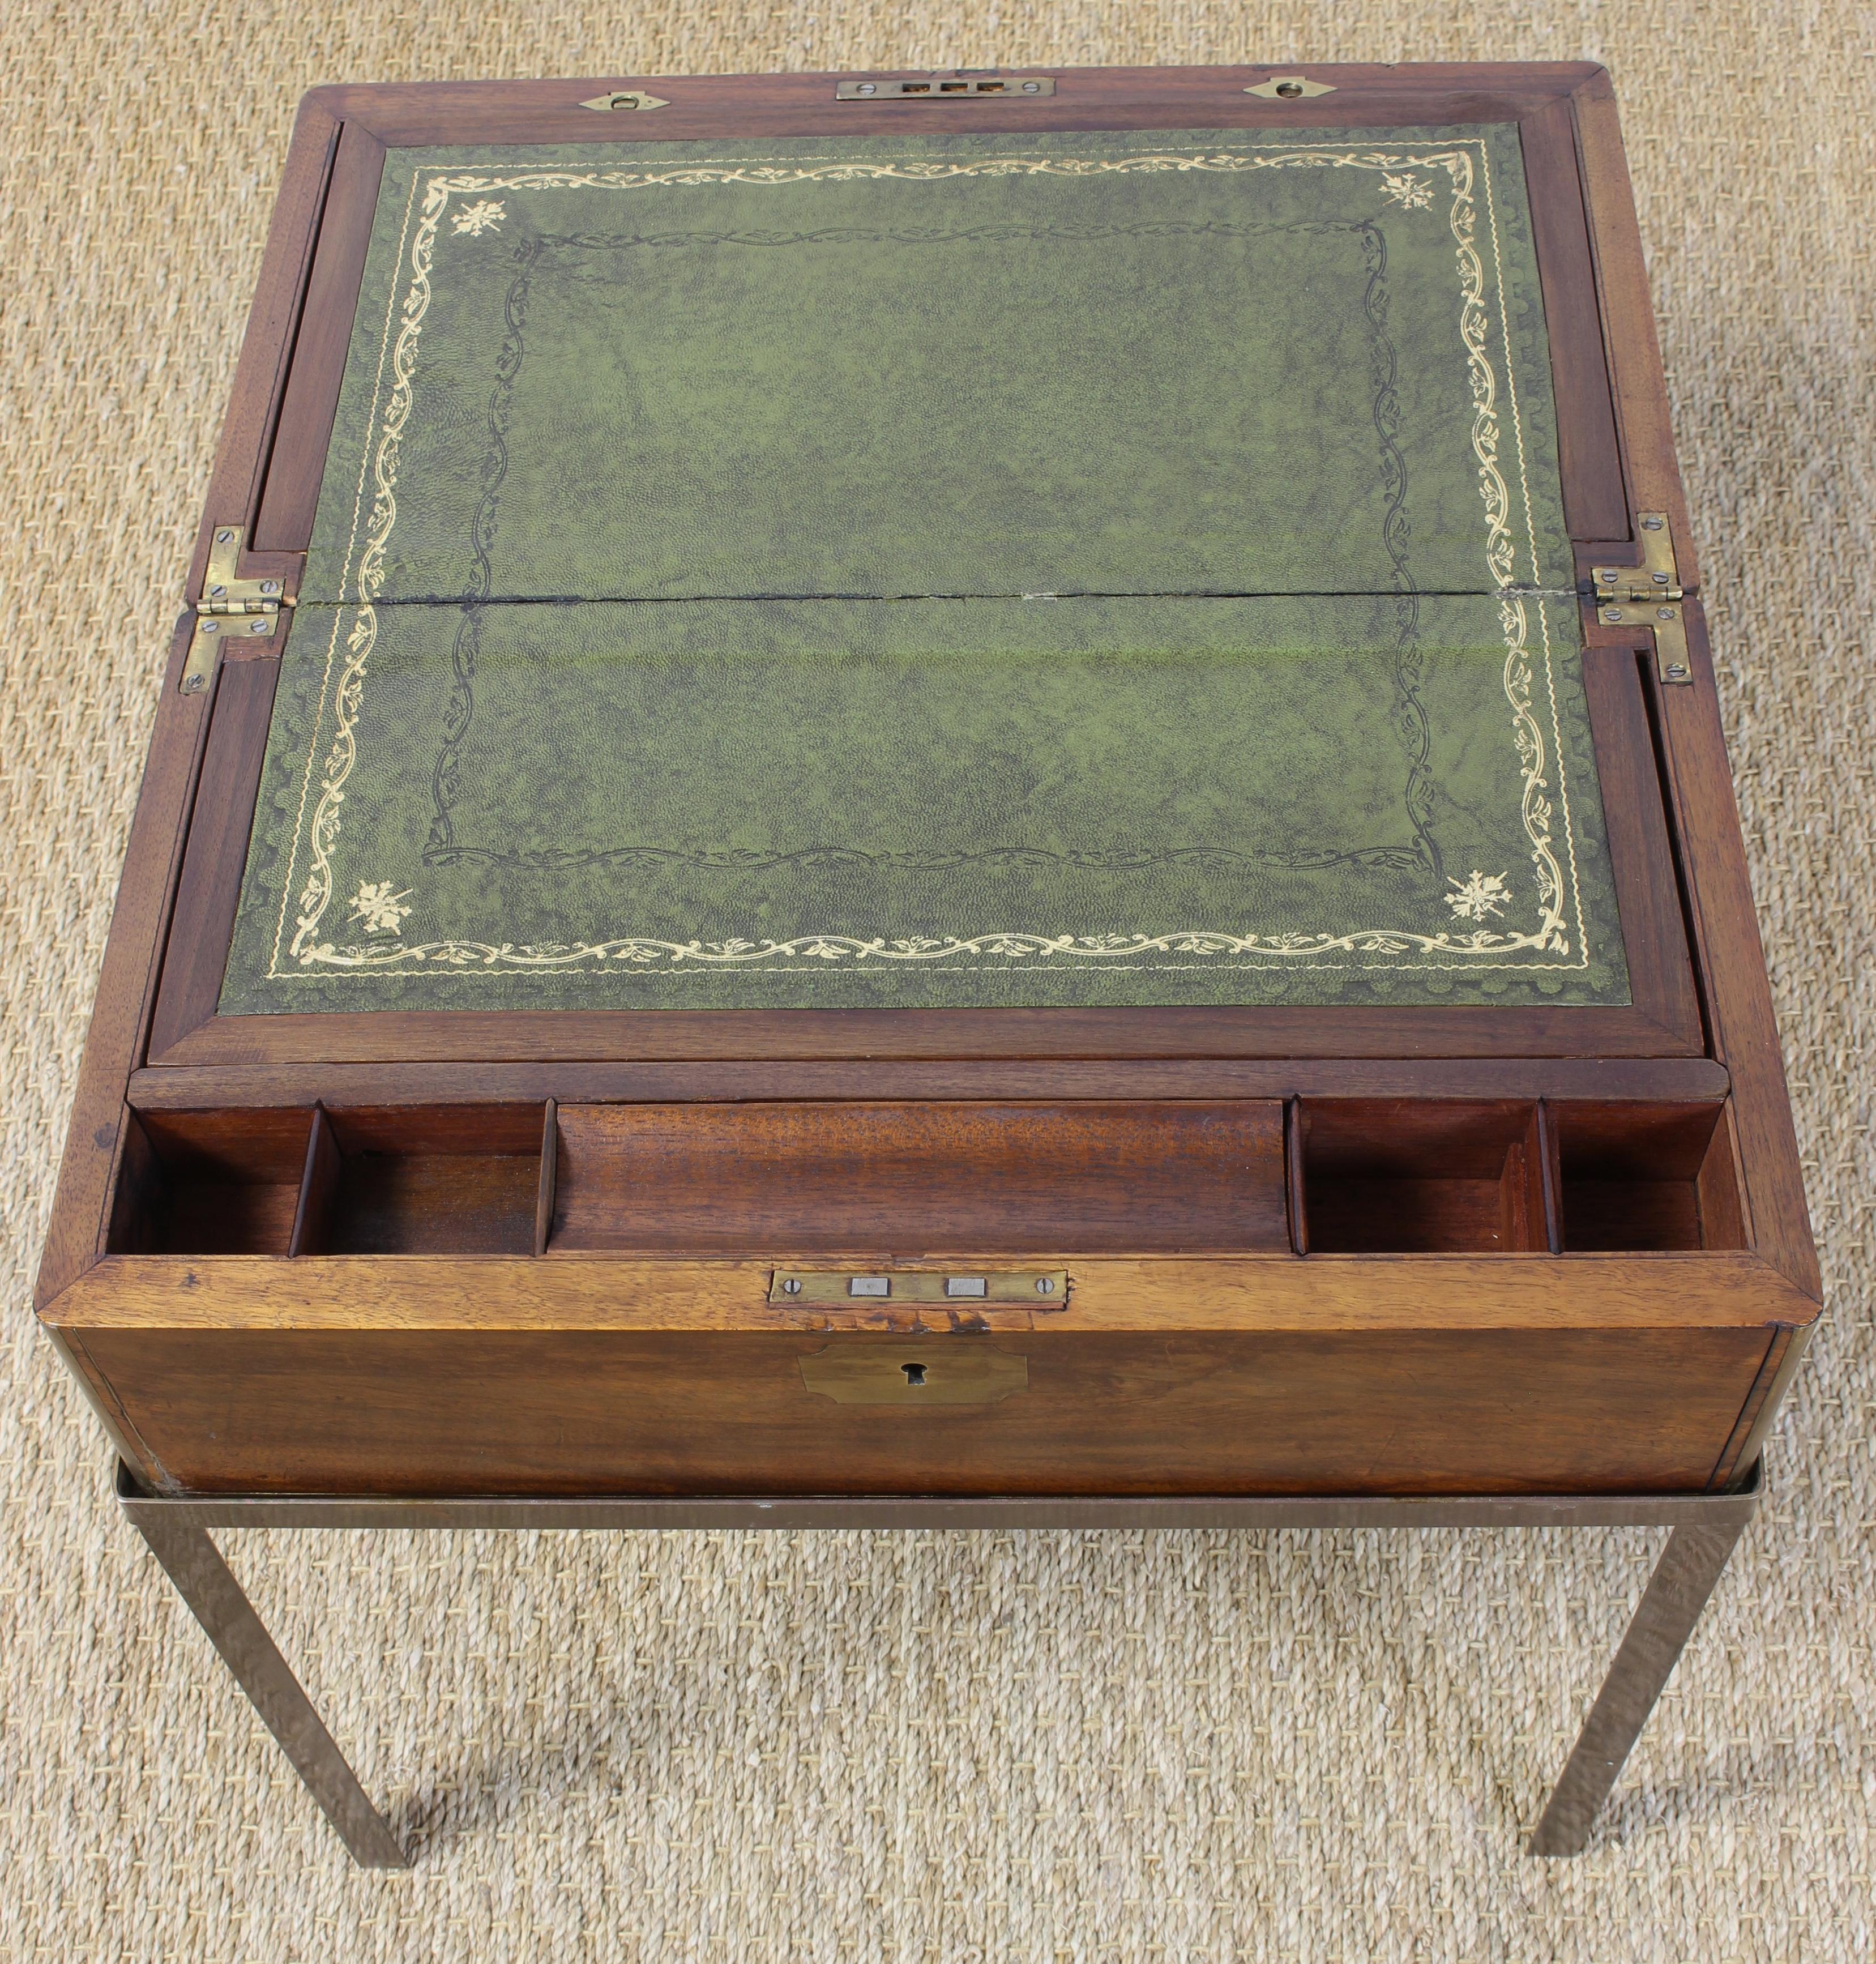 Hand-Crafted Mid-19th Century English Writing Box on Stand